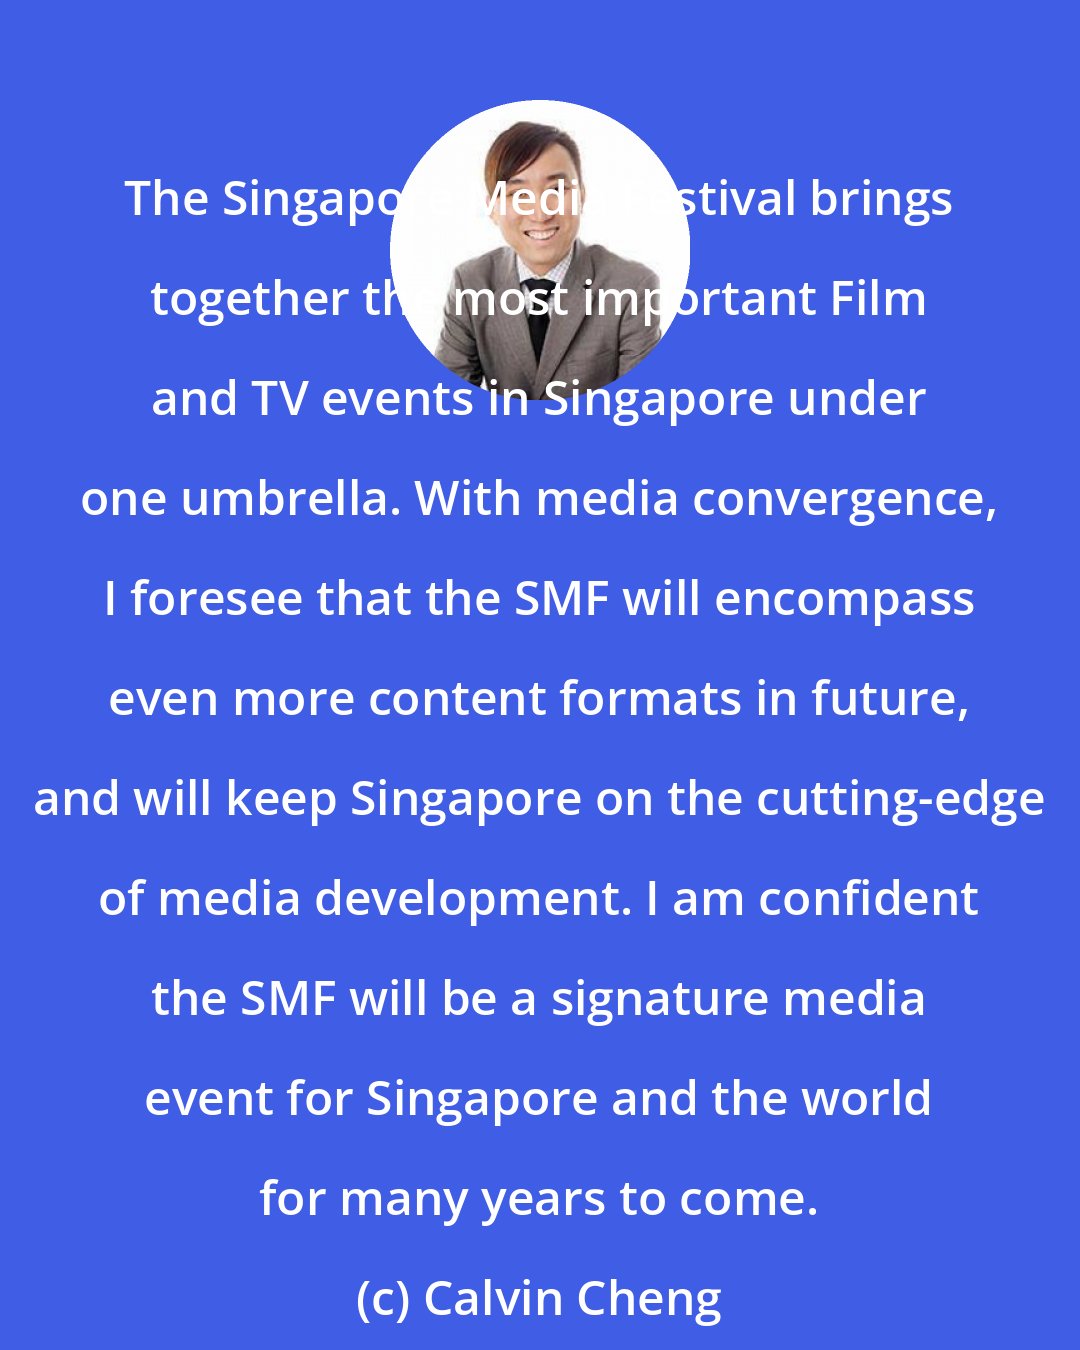 Calvin Cheng: The Singapore Media Festival brings together the most important Film and TV events in Singapore under one umbrella. With media convergence, I foresee that the SMF will encompass even more content formats in future, and will keep Singapore on the cutting-edge of media development. I am confident the SMF will be a signature media event for Singapore and the world for many years to come.